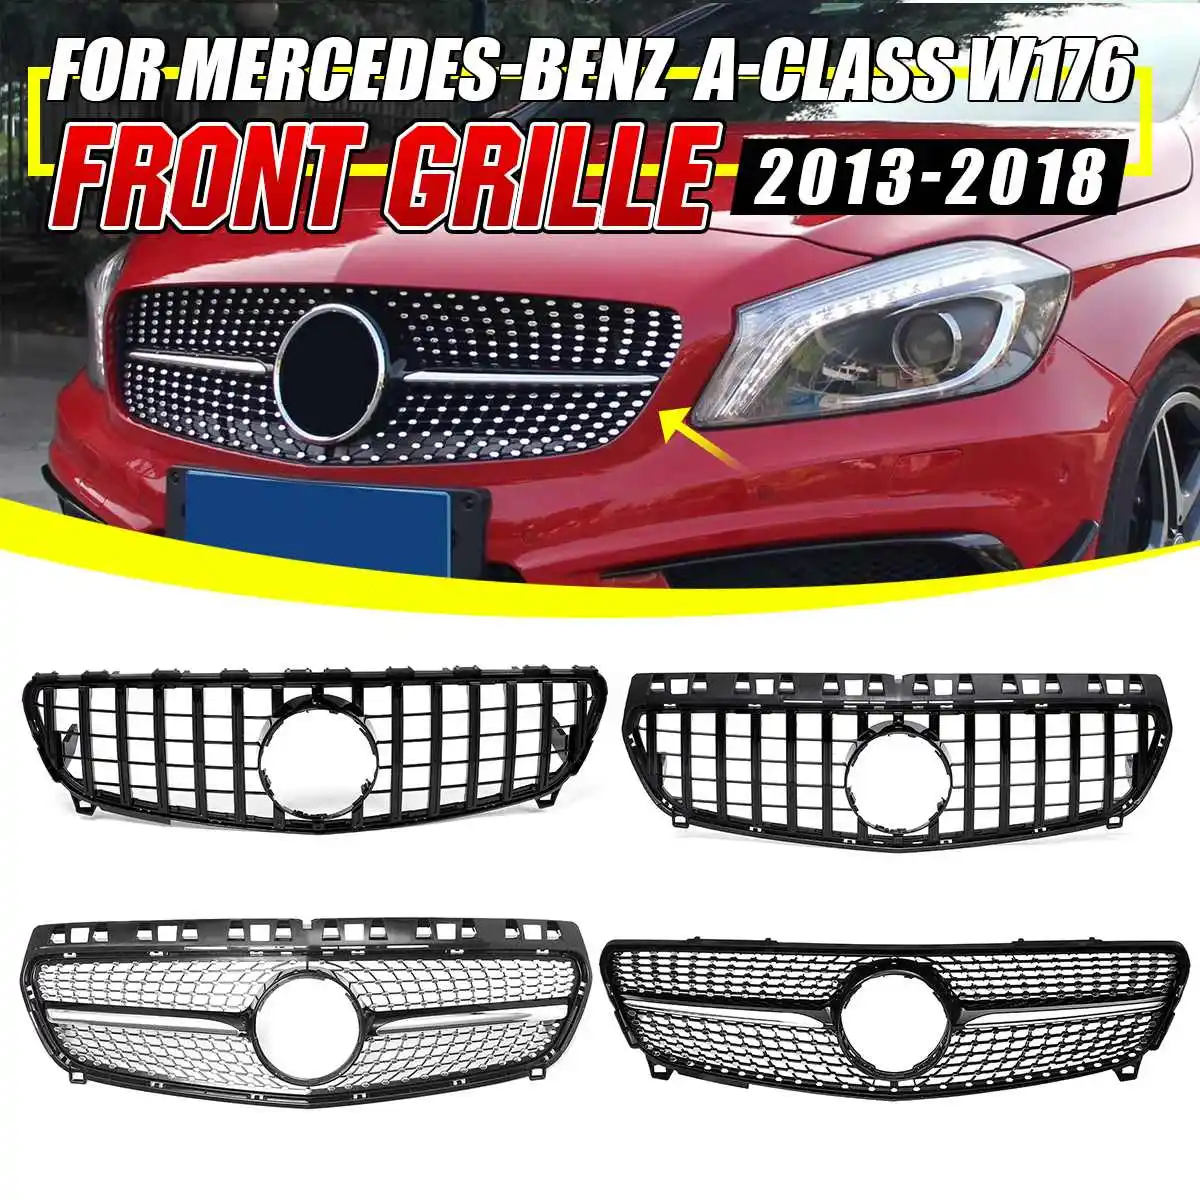 Diamond/GTR Style Car Front Bumper Grill Grille For Mercedes For Benz W176 A Class A200 A250 A45 AMG 2013-2018 Racing Grille